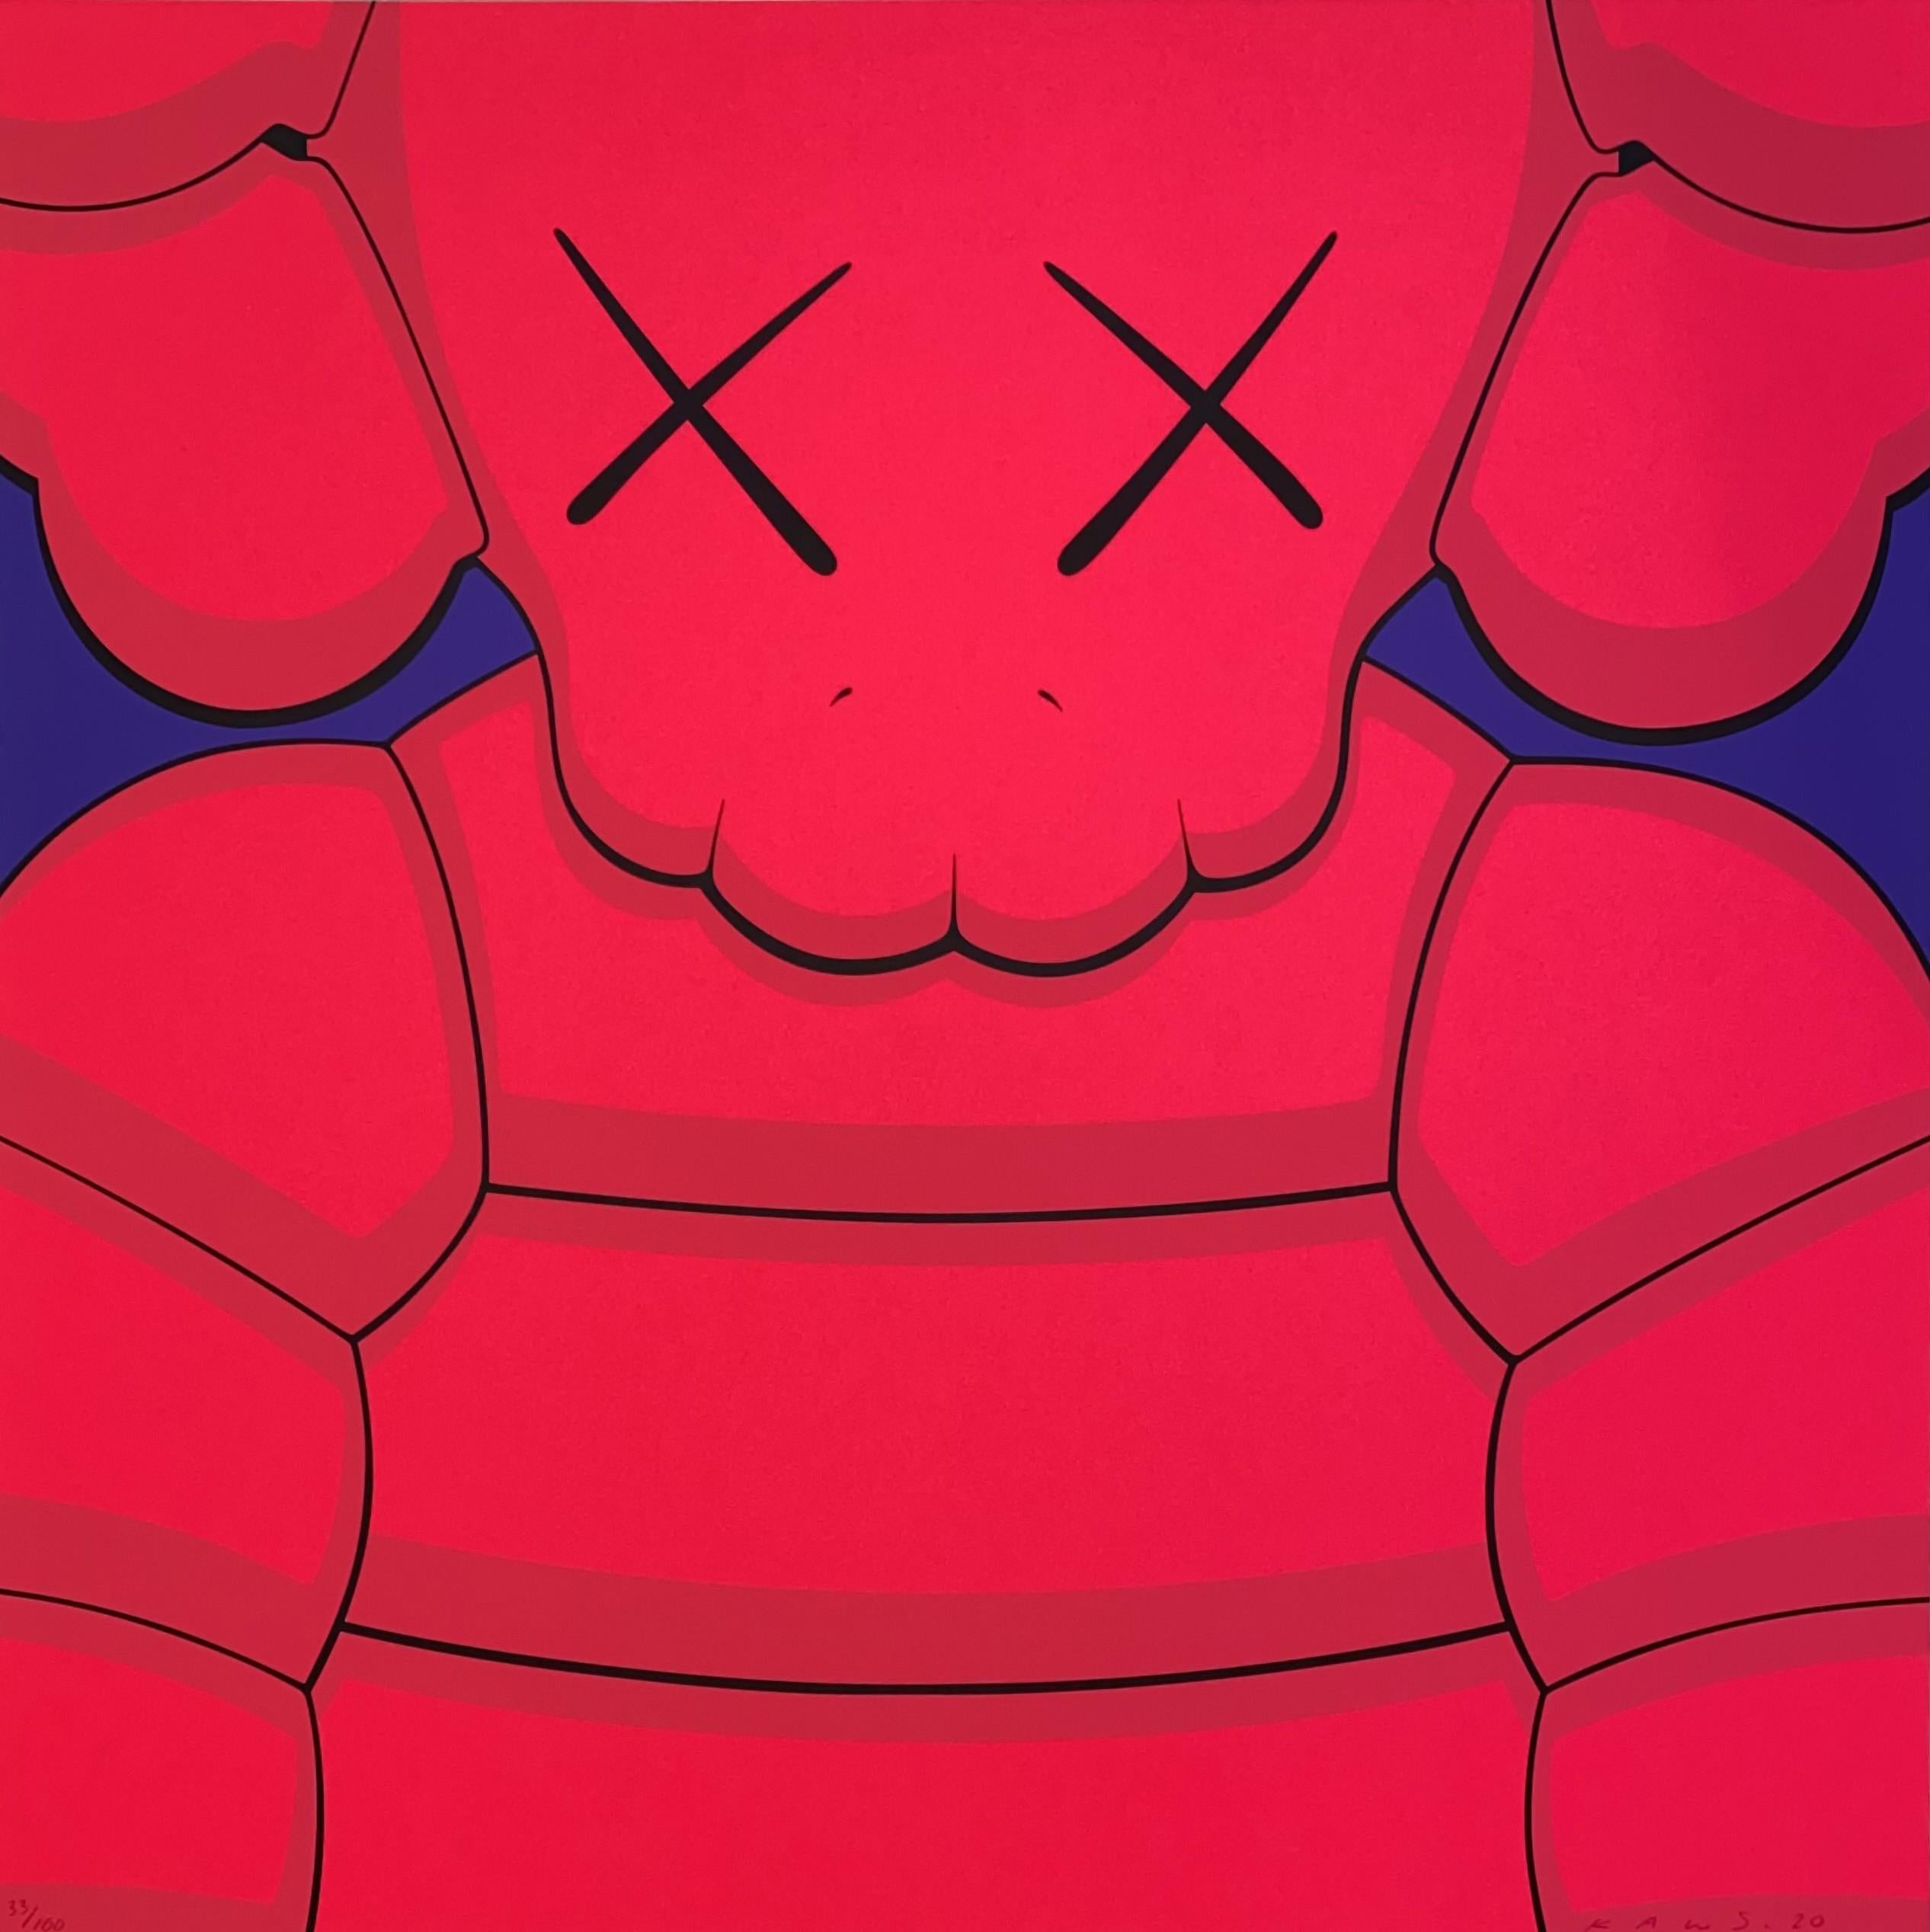 KAWS Abstract Print - What Party (Pink)